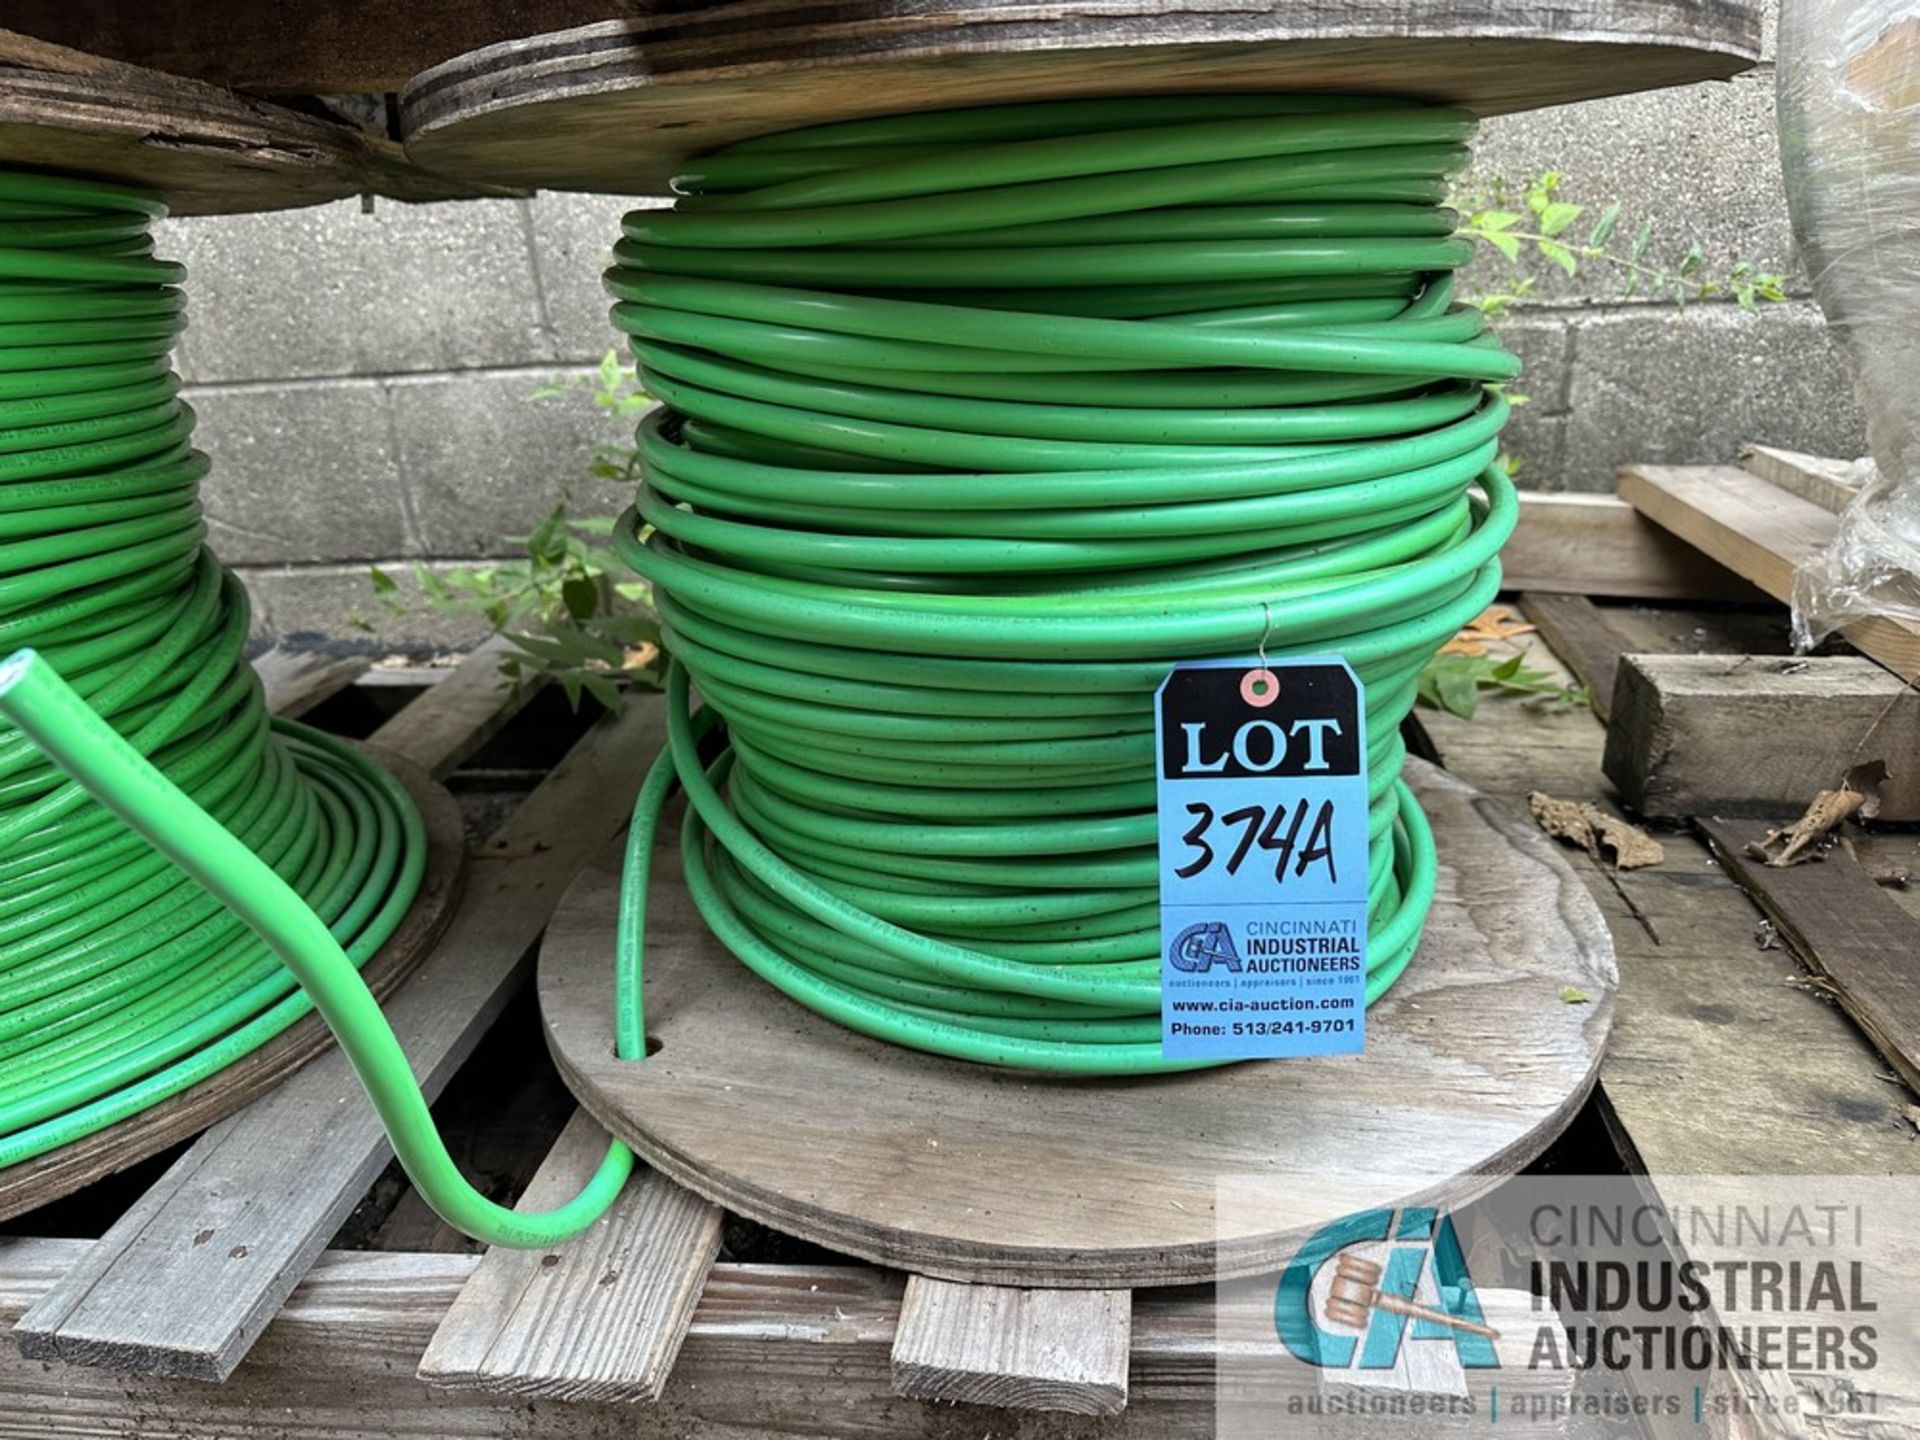 (1) SPOOL, APPROX. 300' ALUMINUM WIRE, GREEN, 2/0, Lengths are estimates only, no claim can be